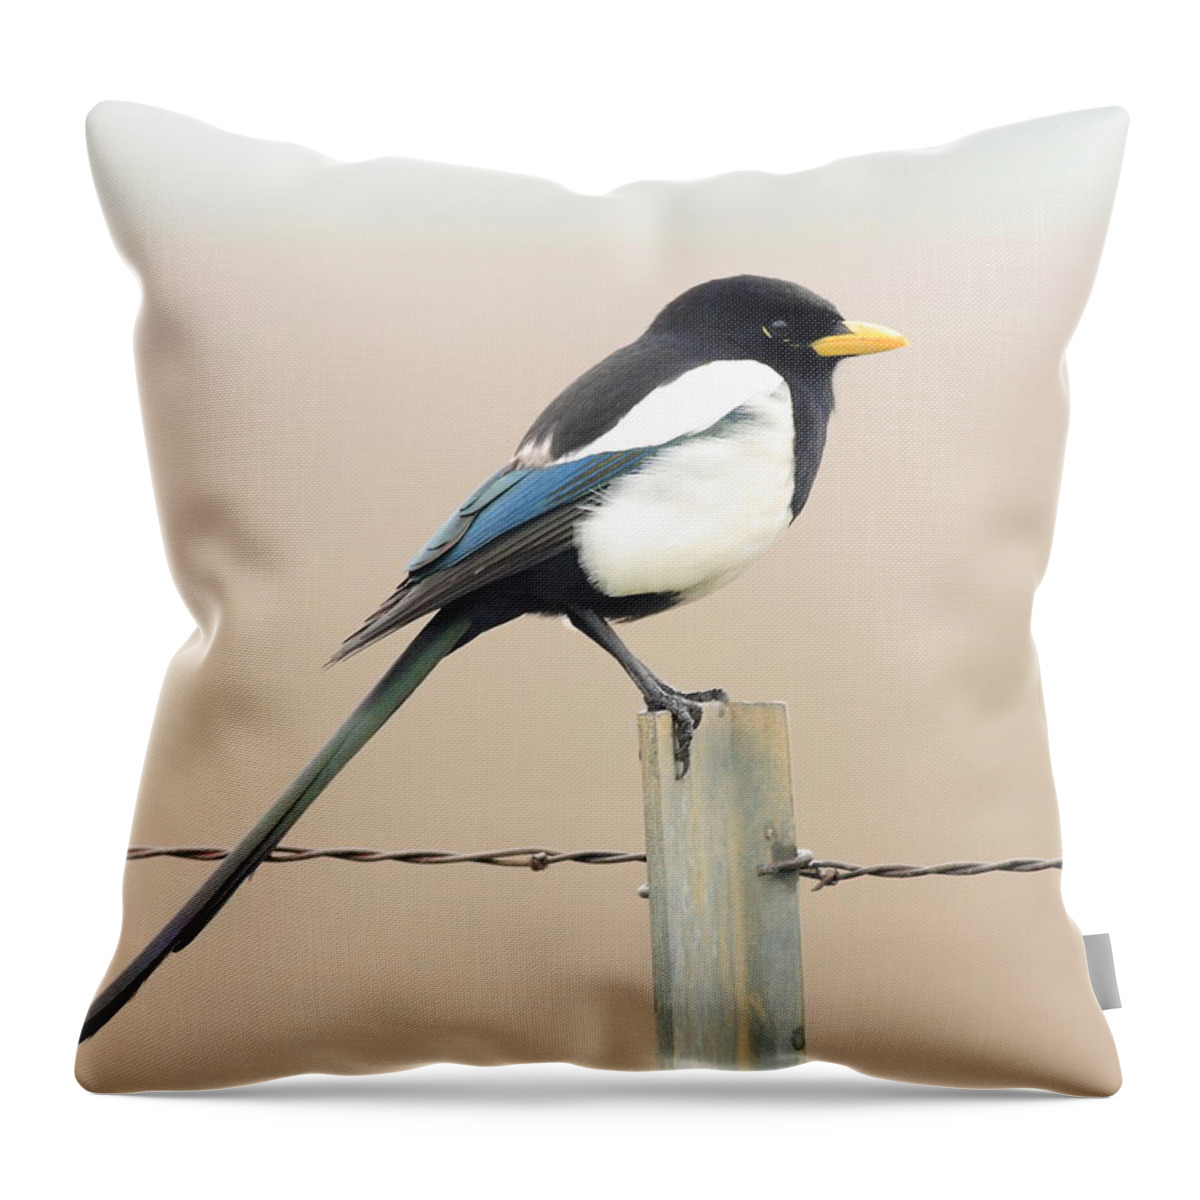 Bird Throw Pillow featuring the photograph Yellow-billed Magpie by Wingsdomain Art and Photography